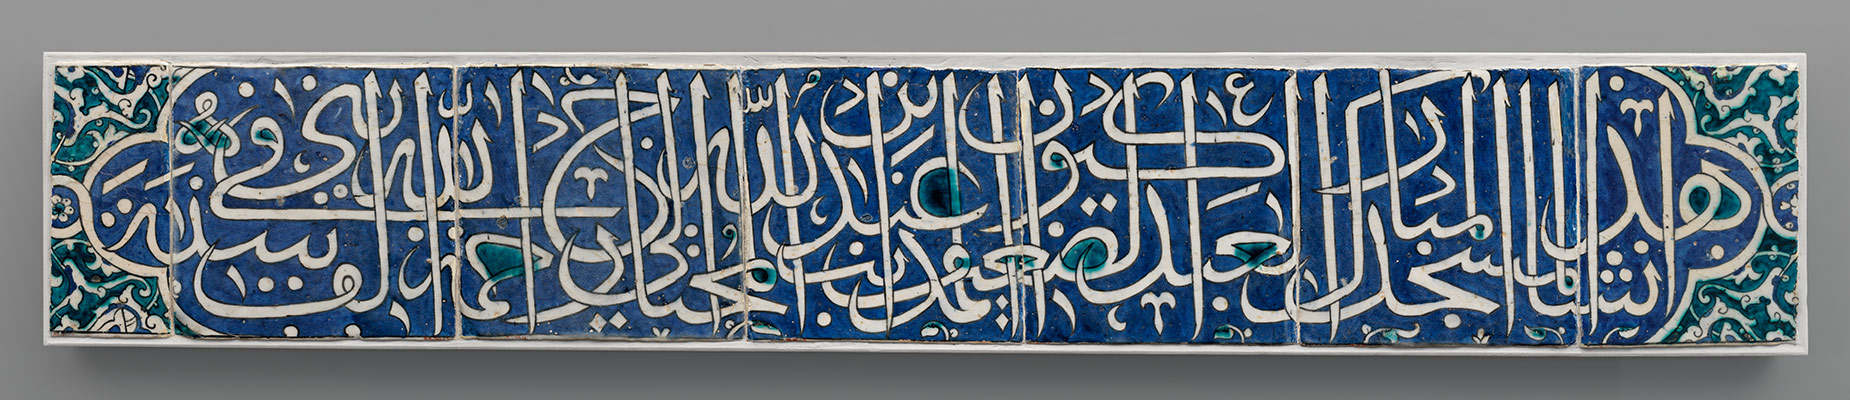 Tile Panel with Calligraphic Inscription